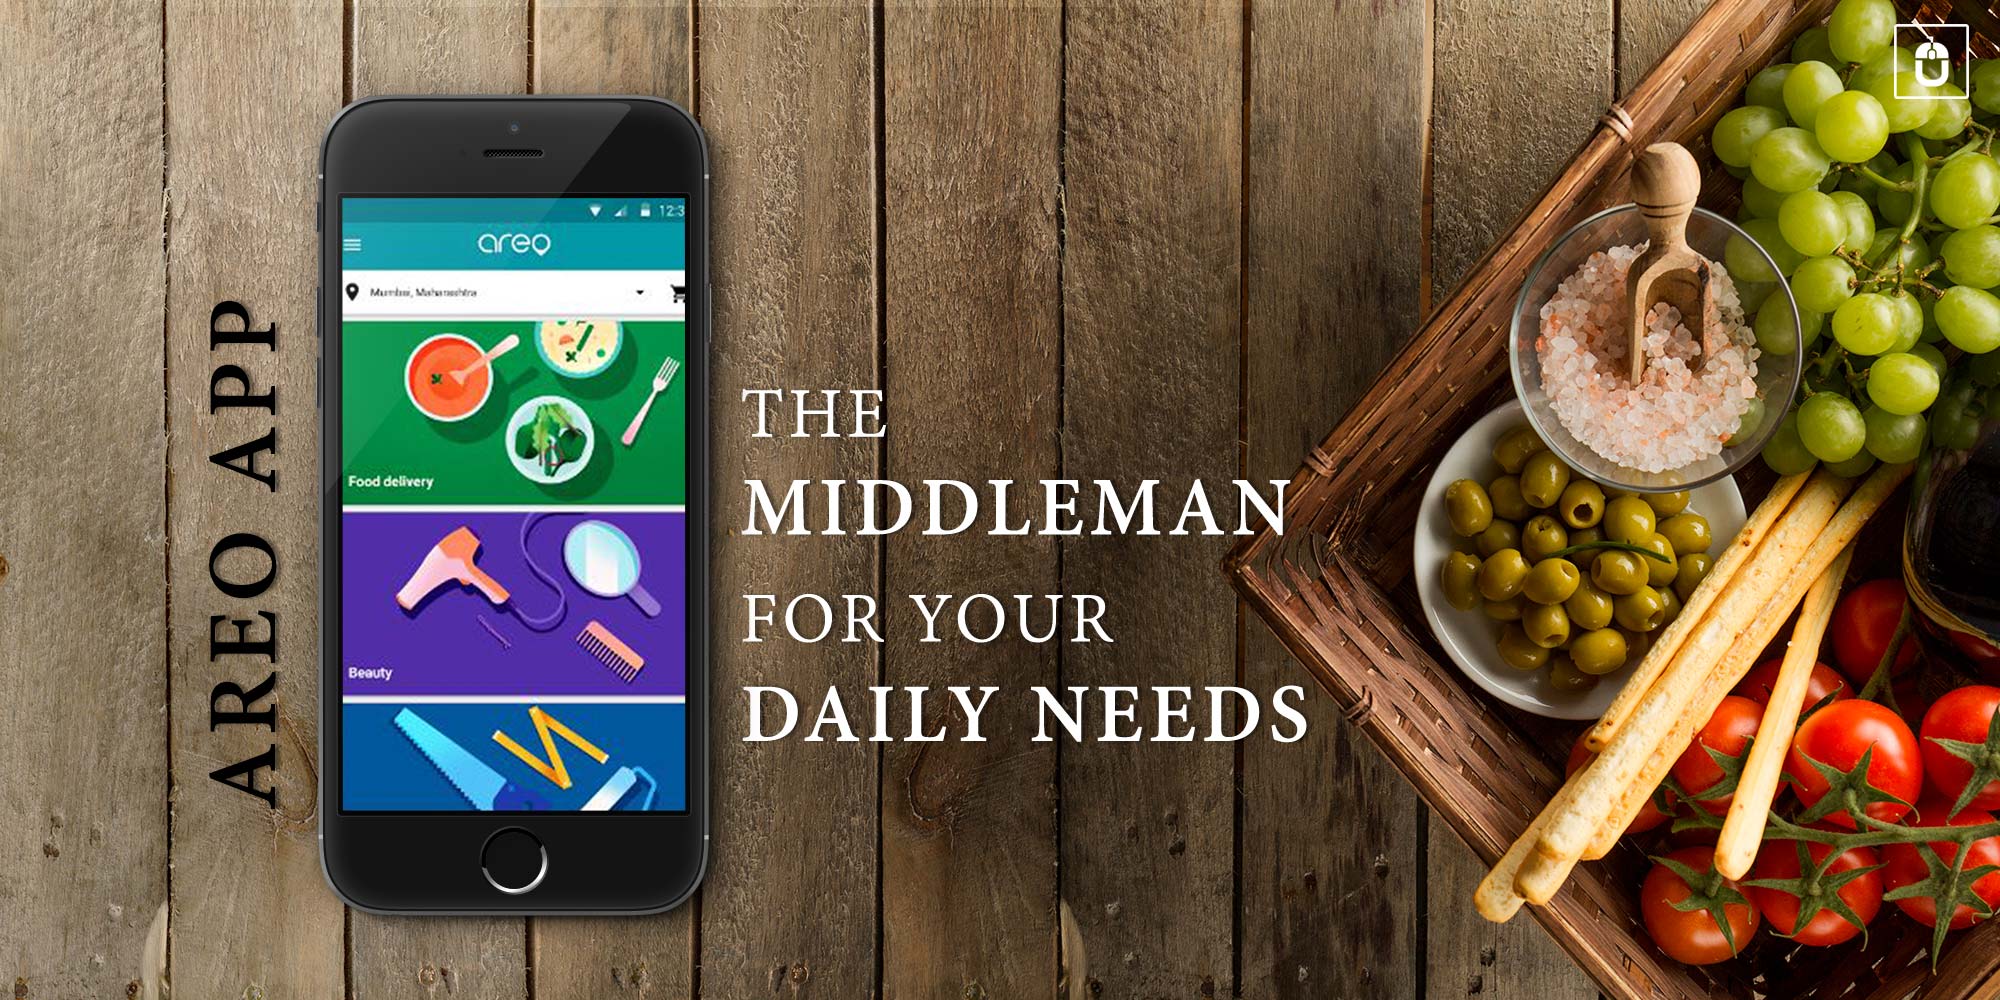 Areo App- The Middleman For Your Daily Needs